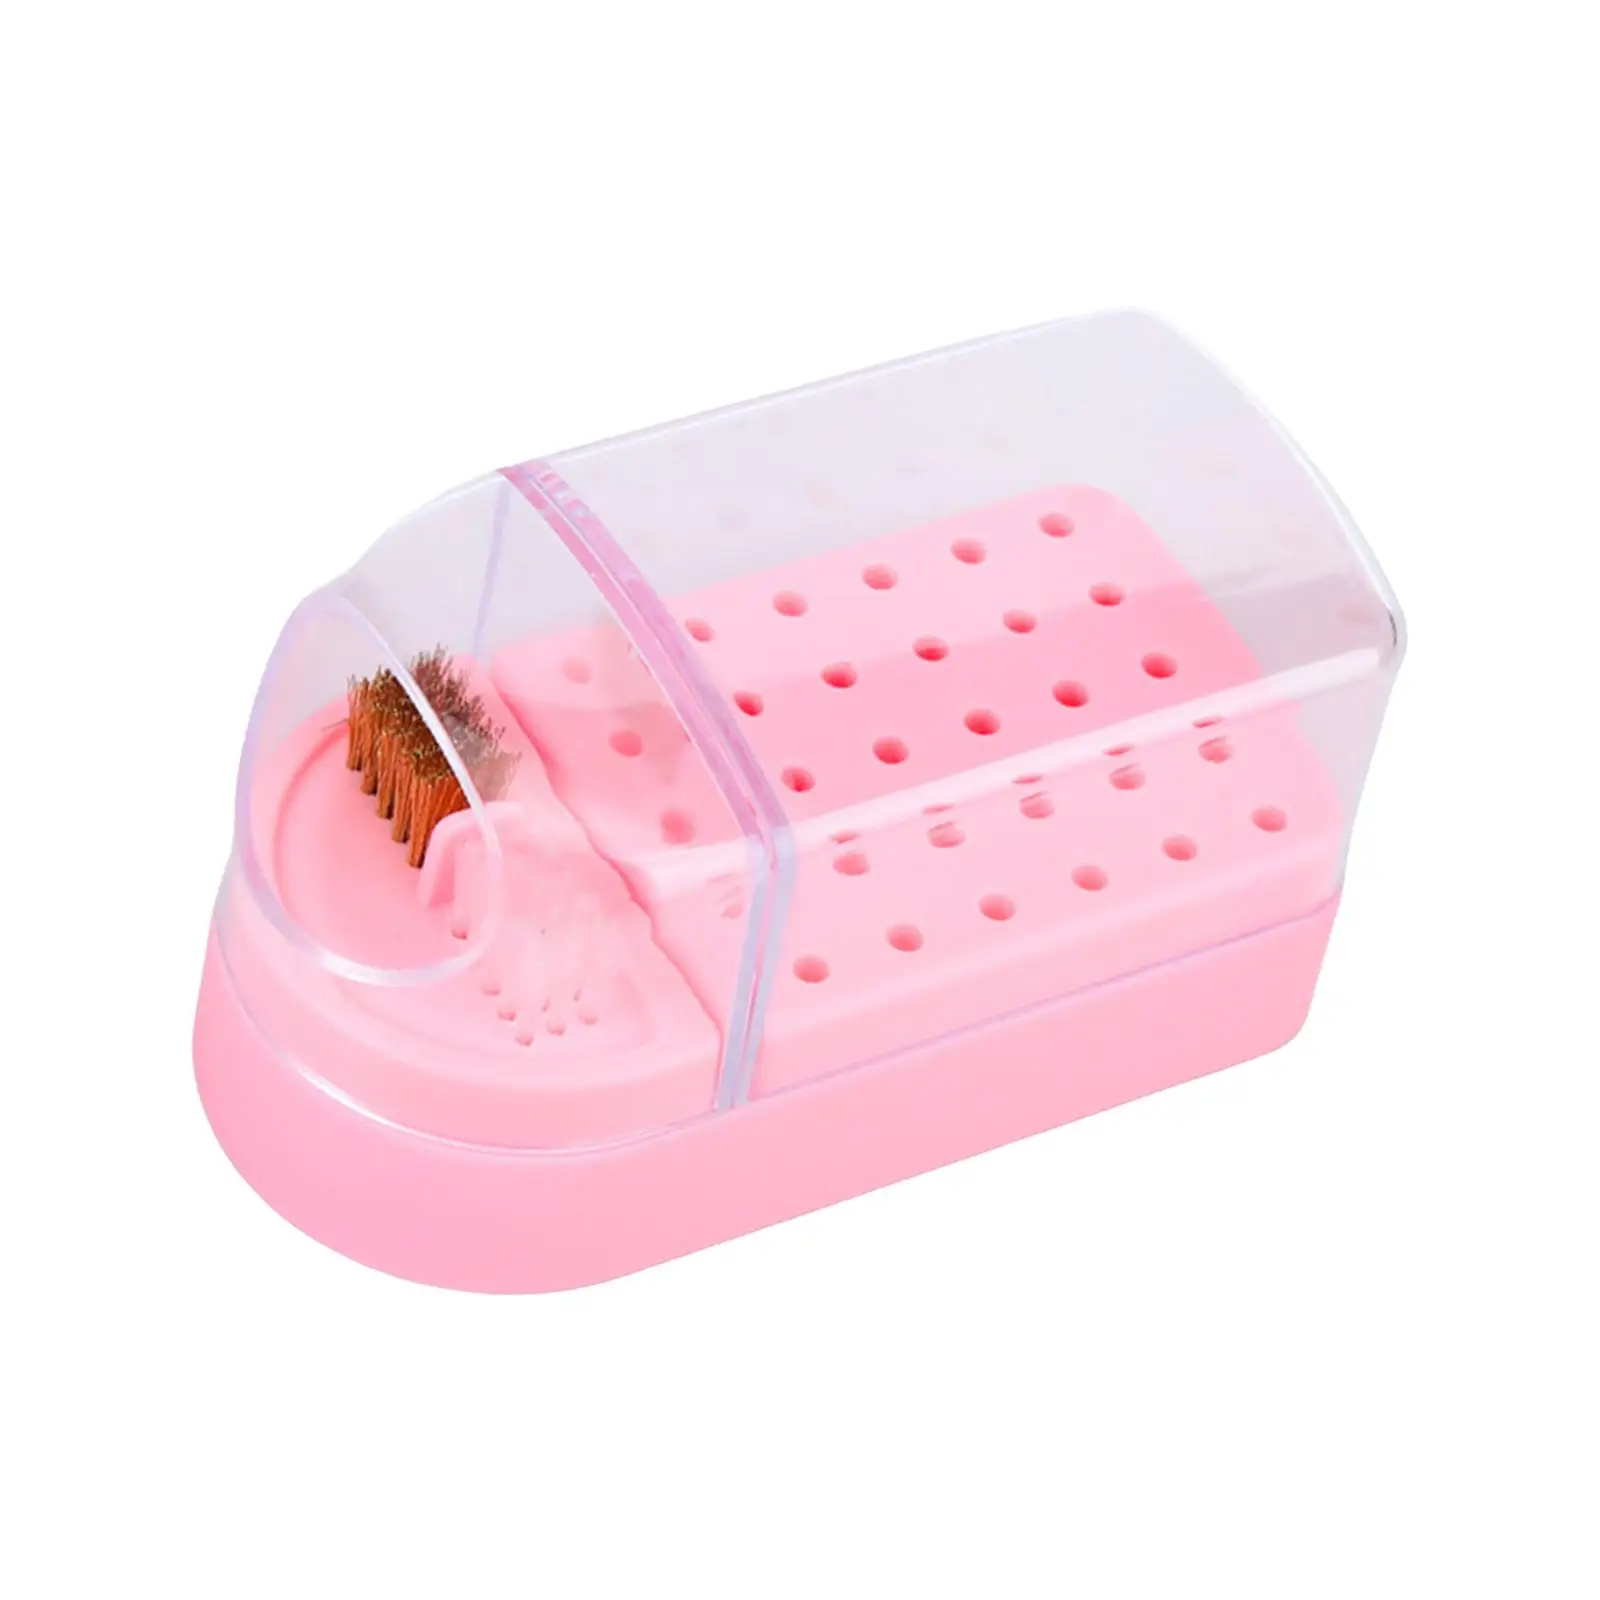 Nail Drill Bit Holder Salon Use 30 Holes 2 in 1 Professional Dustproof Drill Bit Display Stand Storage Container Nail Art Tool